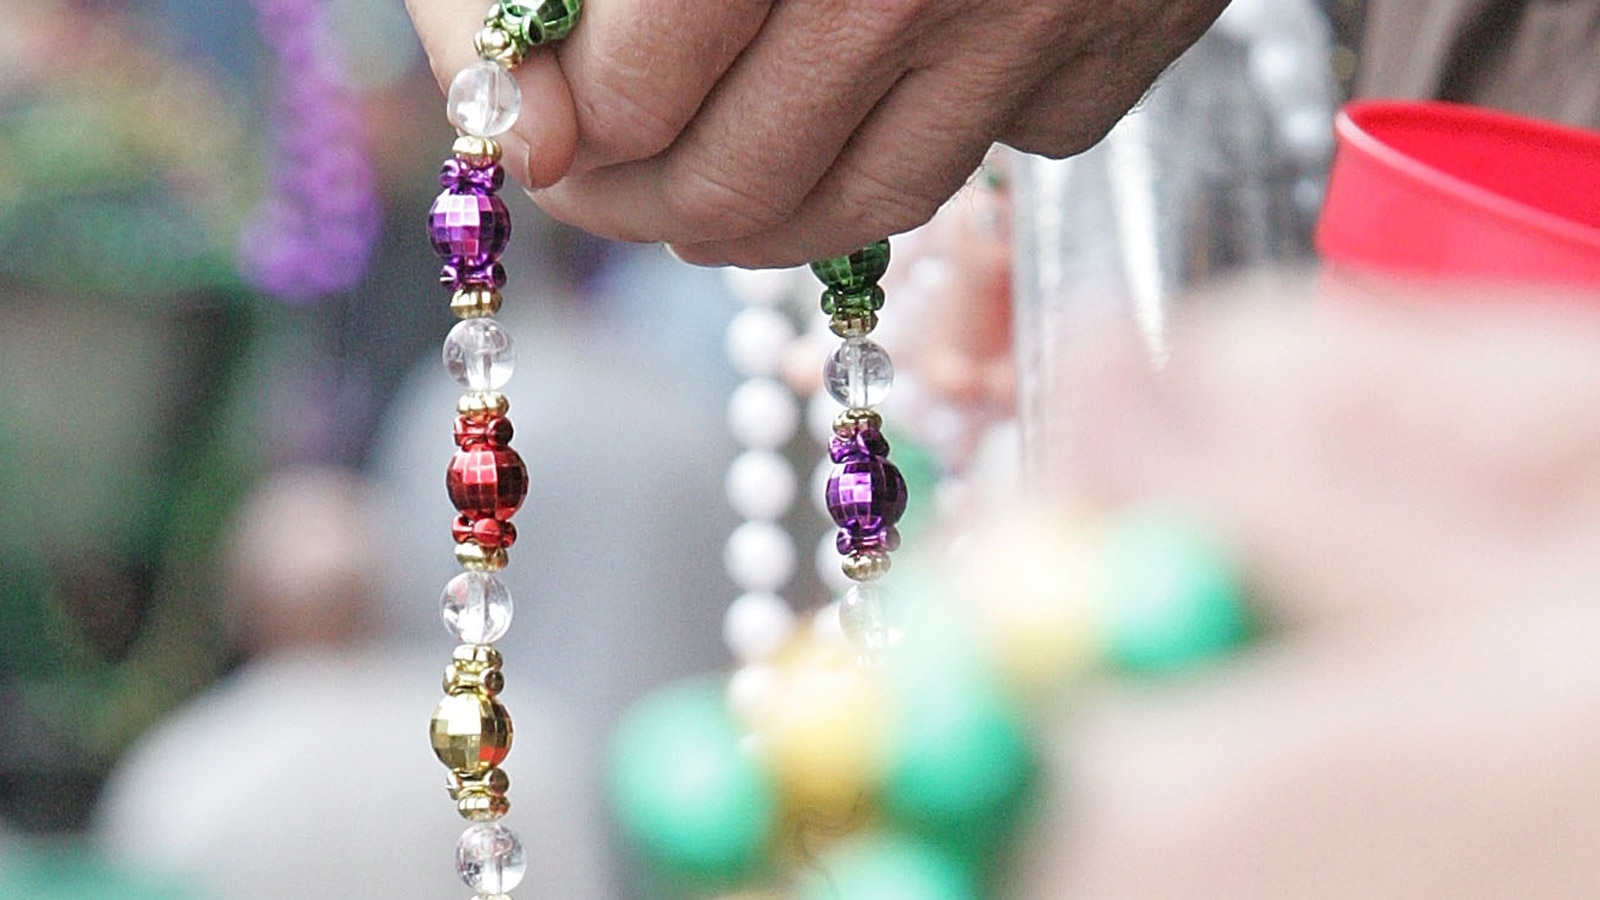 Colorful Mardi Gras beads (credit: Chris Graythen/Getty Images)